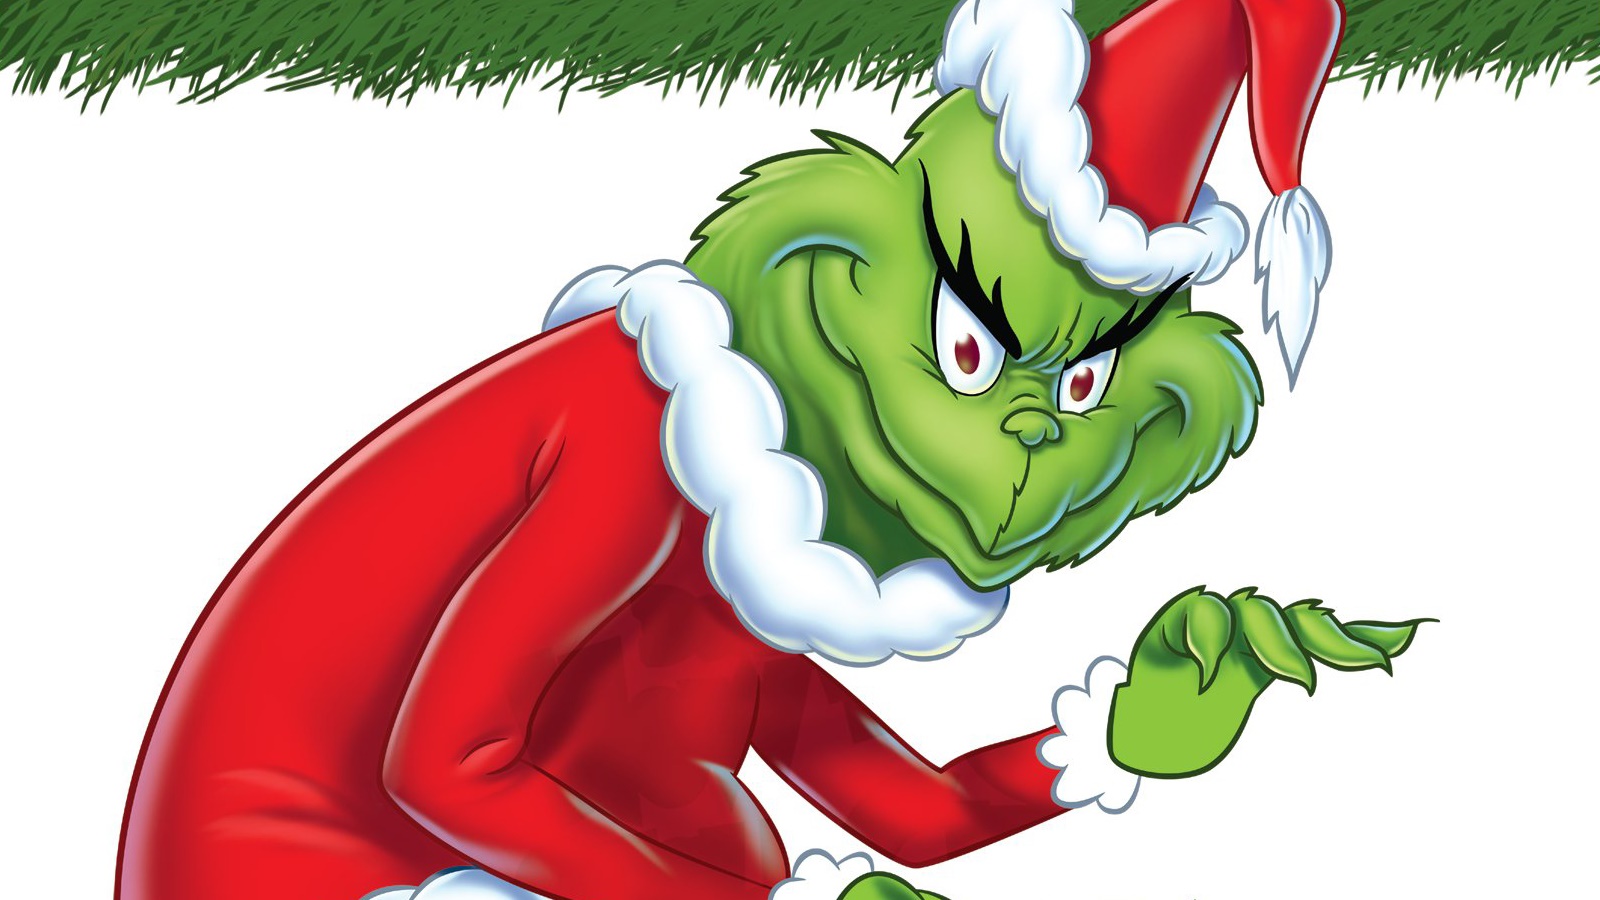 18-facts-about-the-grinch-dr-seuss-how-the-grinch-stole-christmas